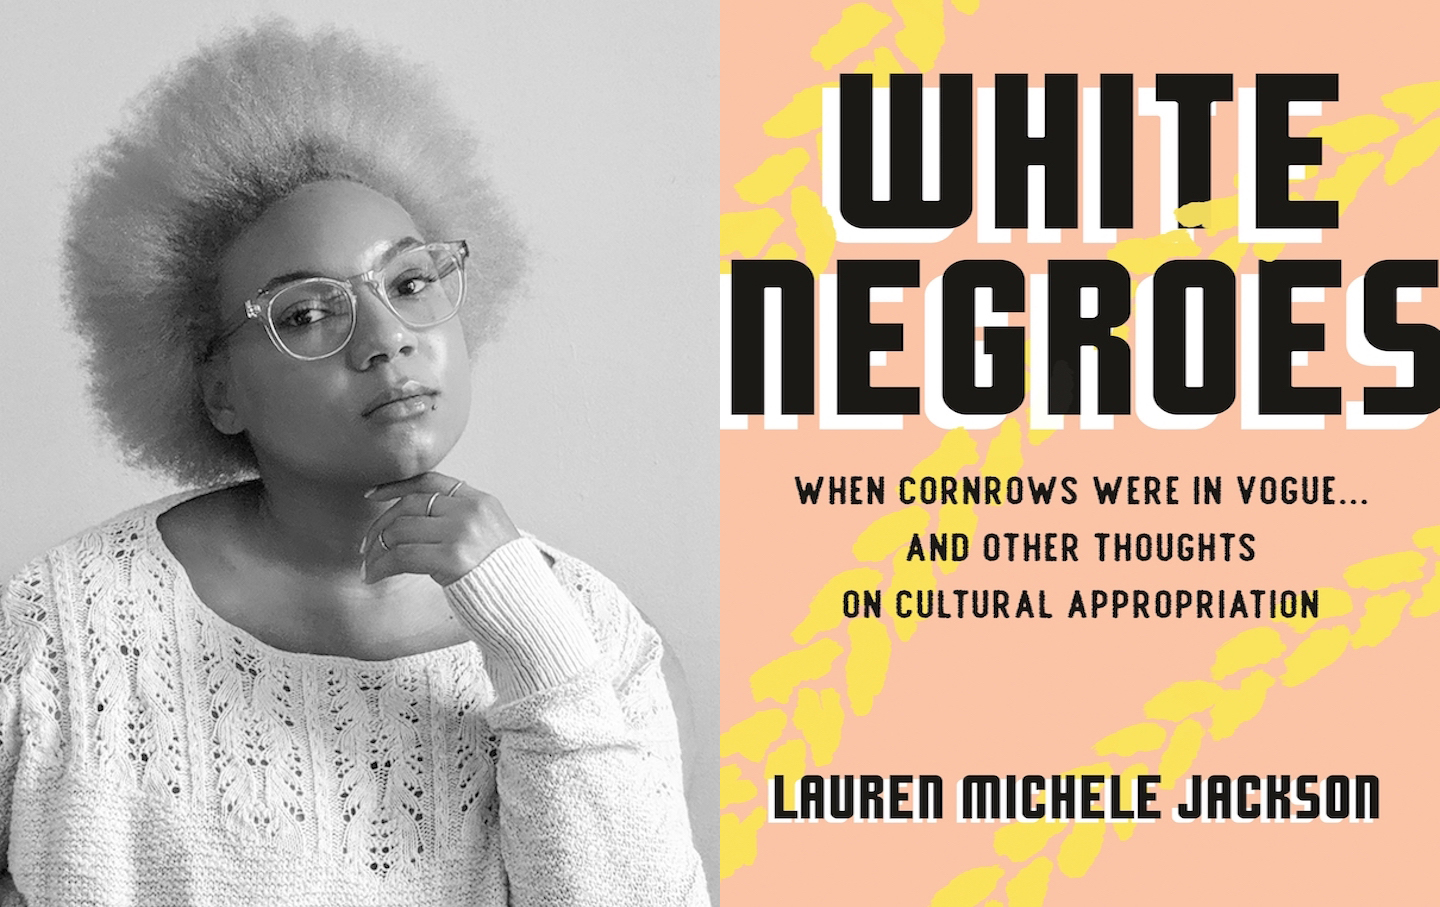 Lauren Michele Jackson Wants to Change How We Talk About Appropriation